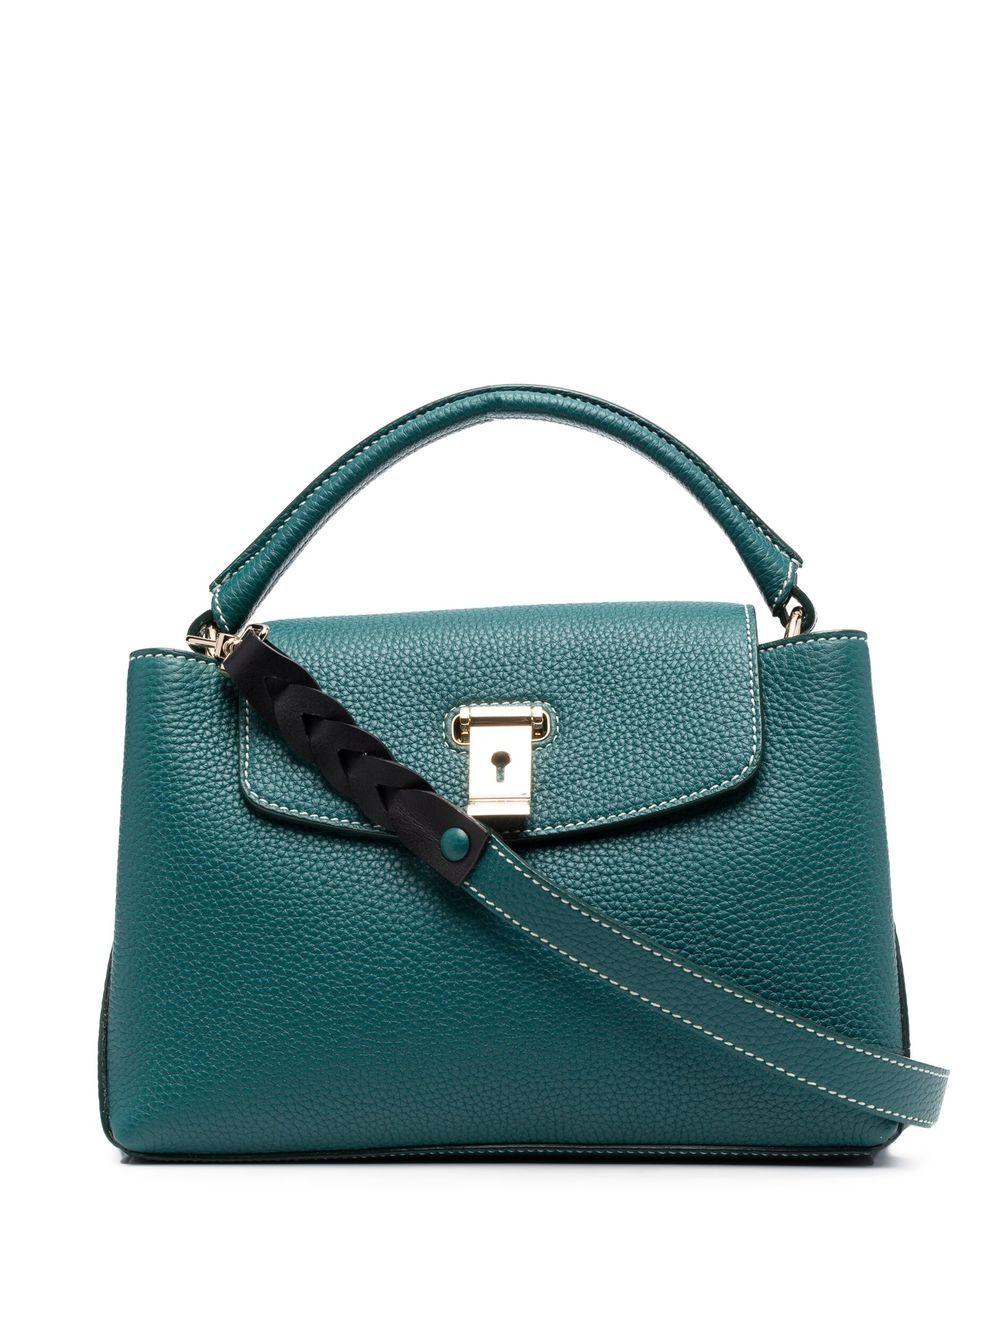 Bally Leather Layka Tote Bag in Blue | Lyst Canada